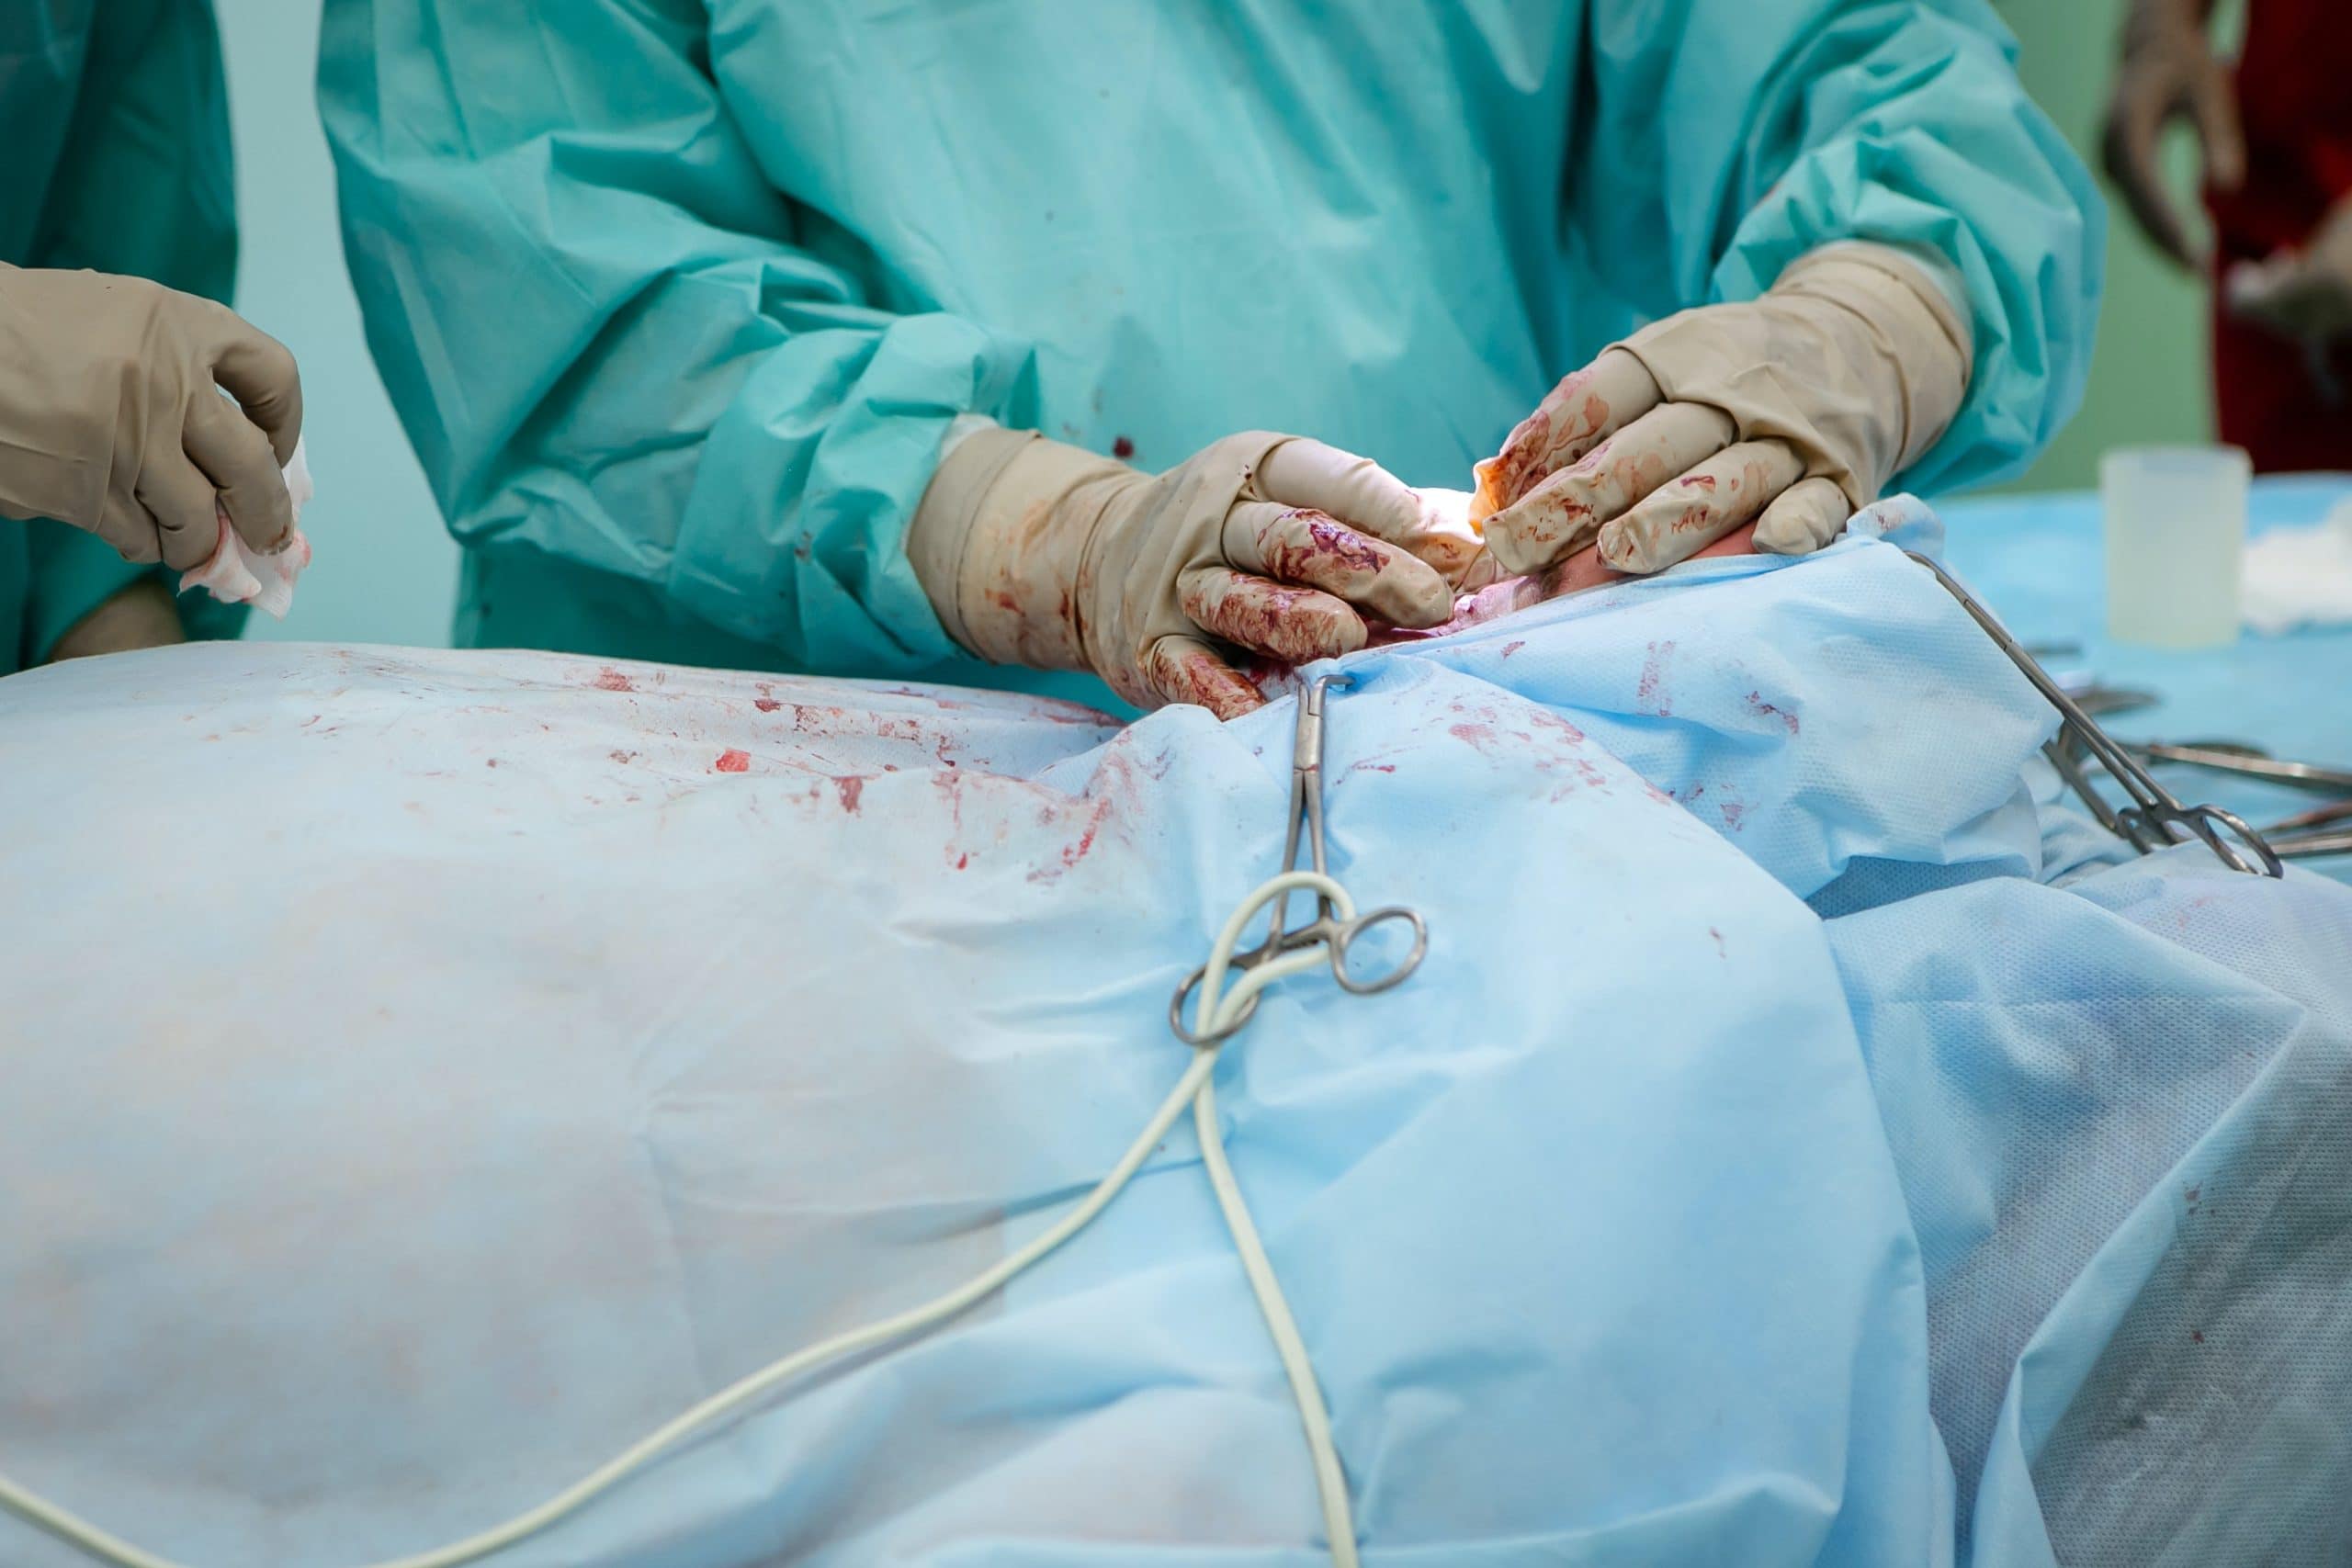 5 Common Medical Malpractice Cases